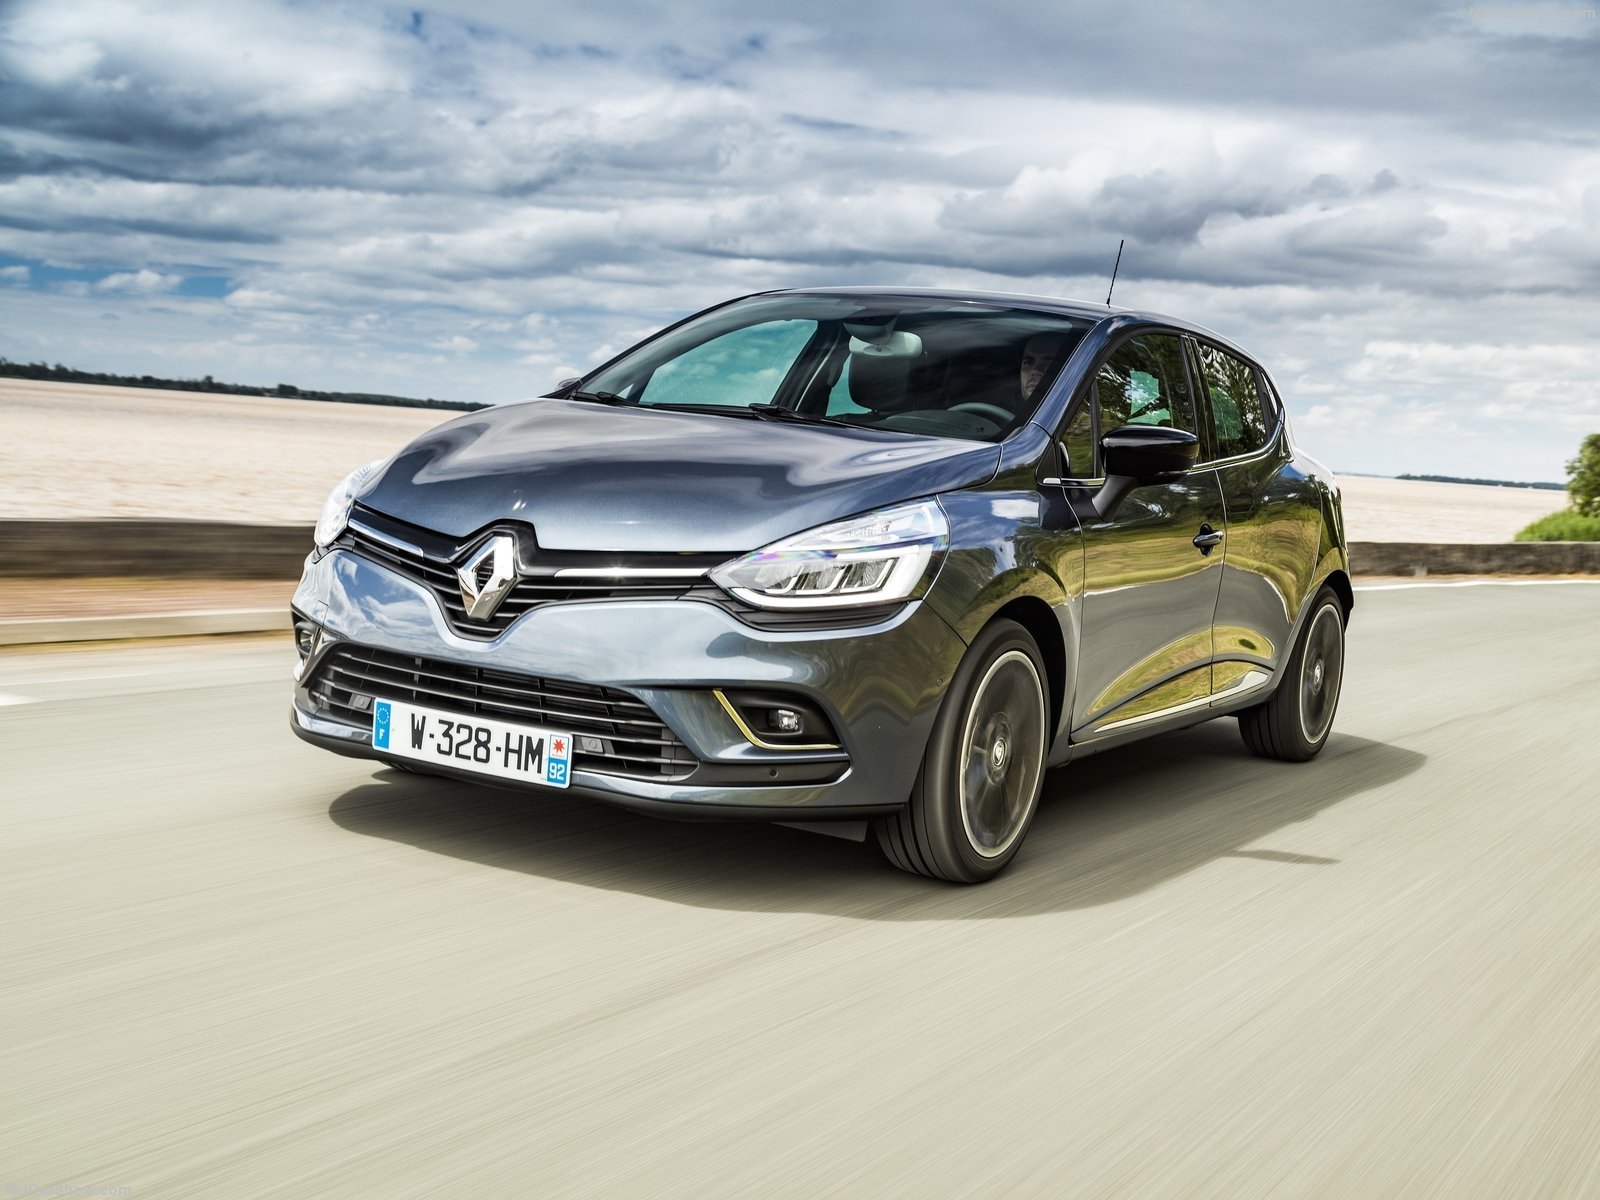 renault, Clio, Cars, French, 2016 Wallpaper